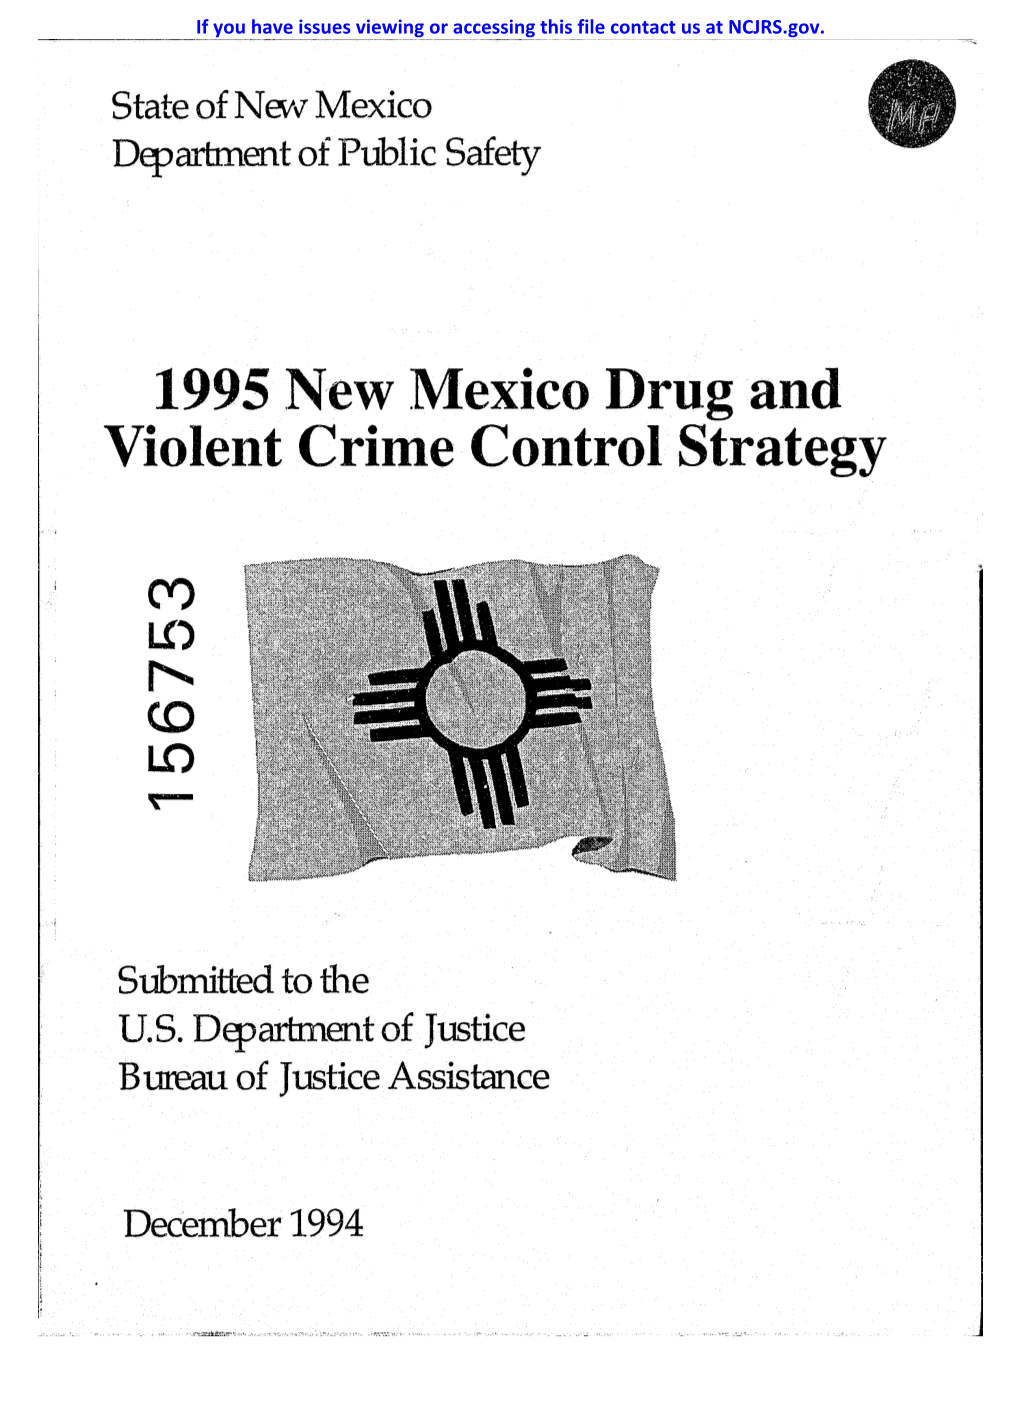 1995 New Mexico Drug and Violent Crime Control Strategy